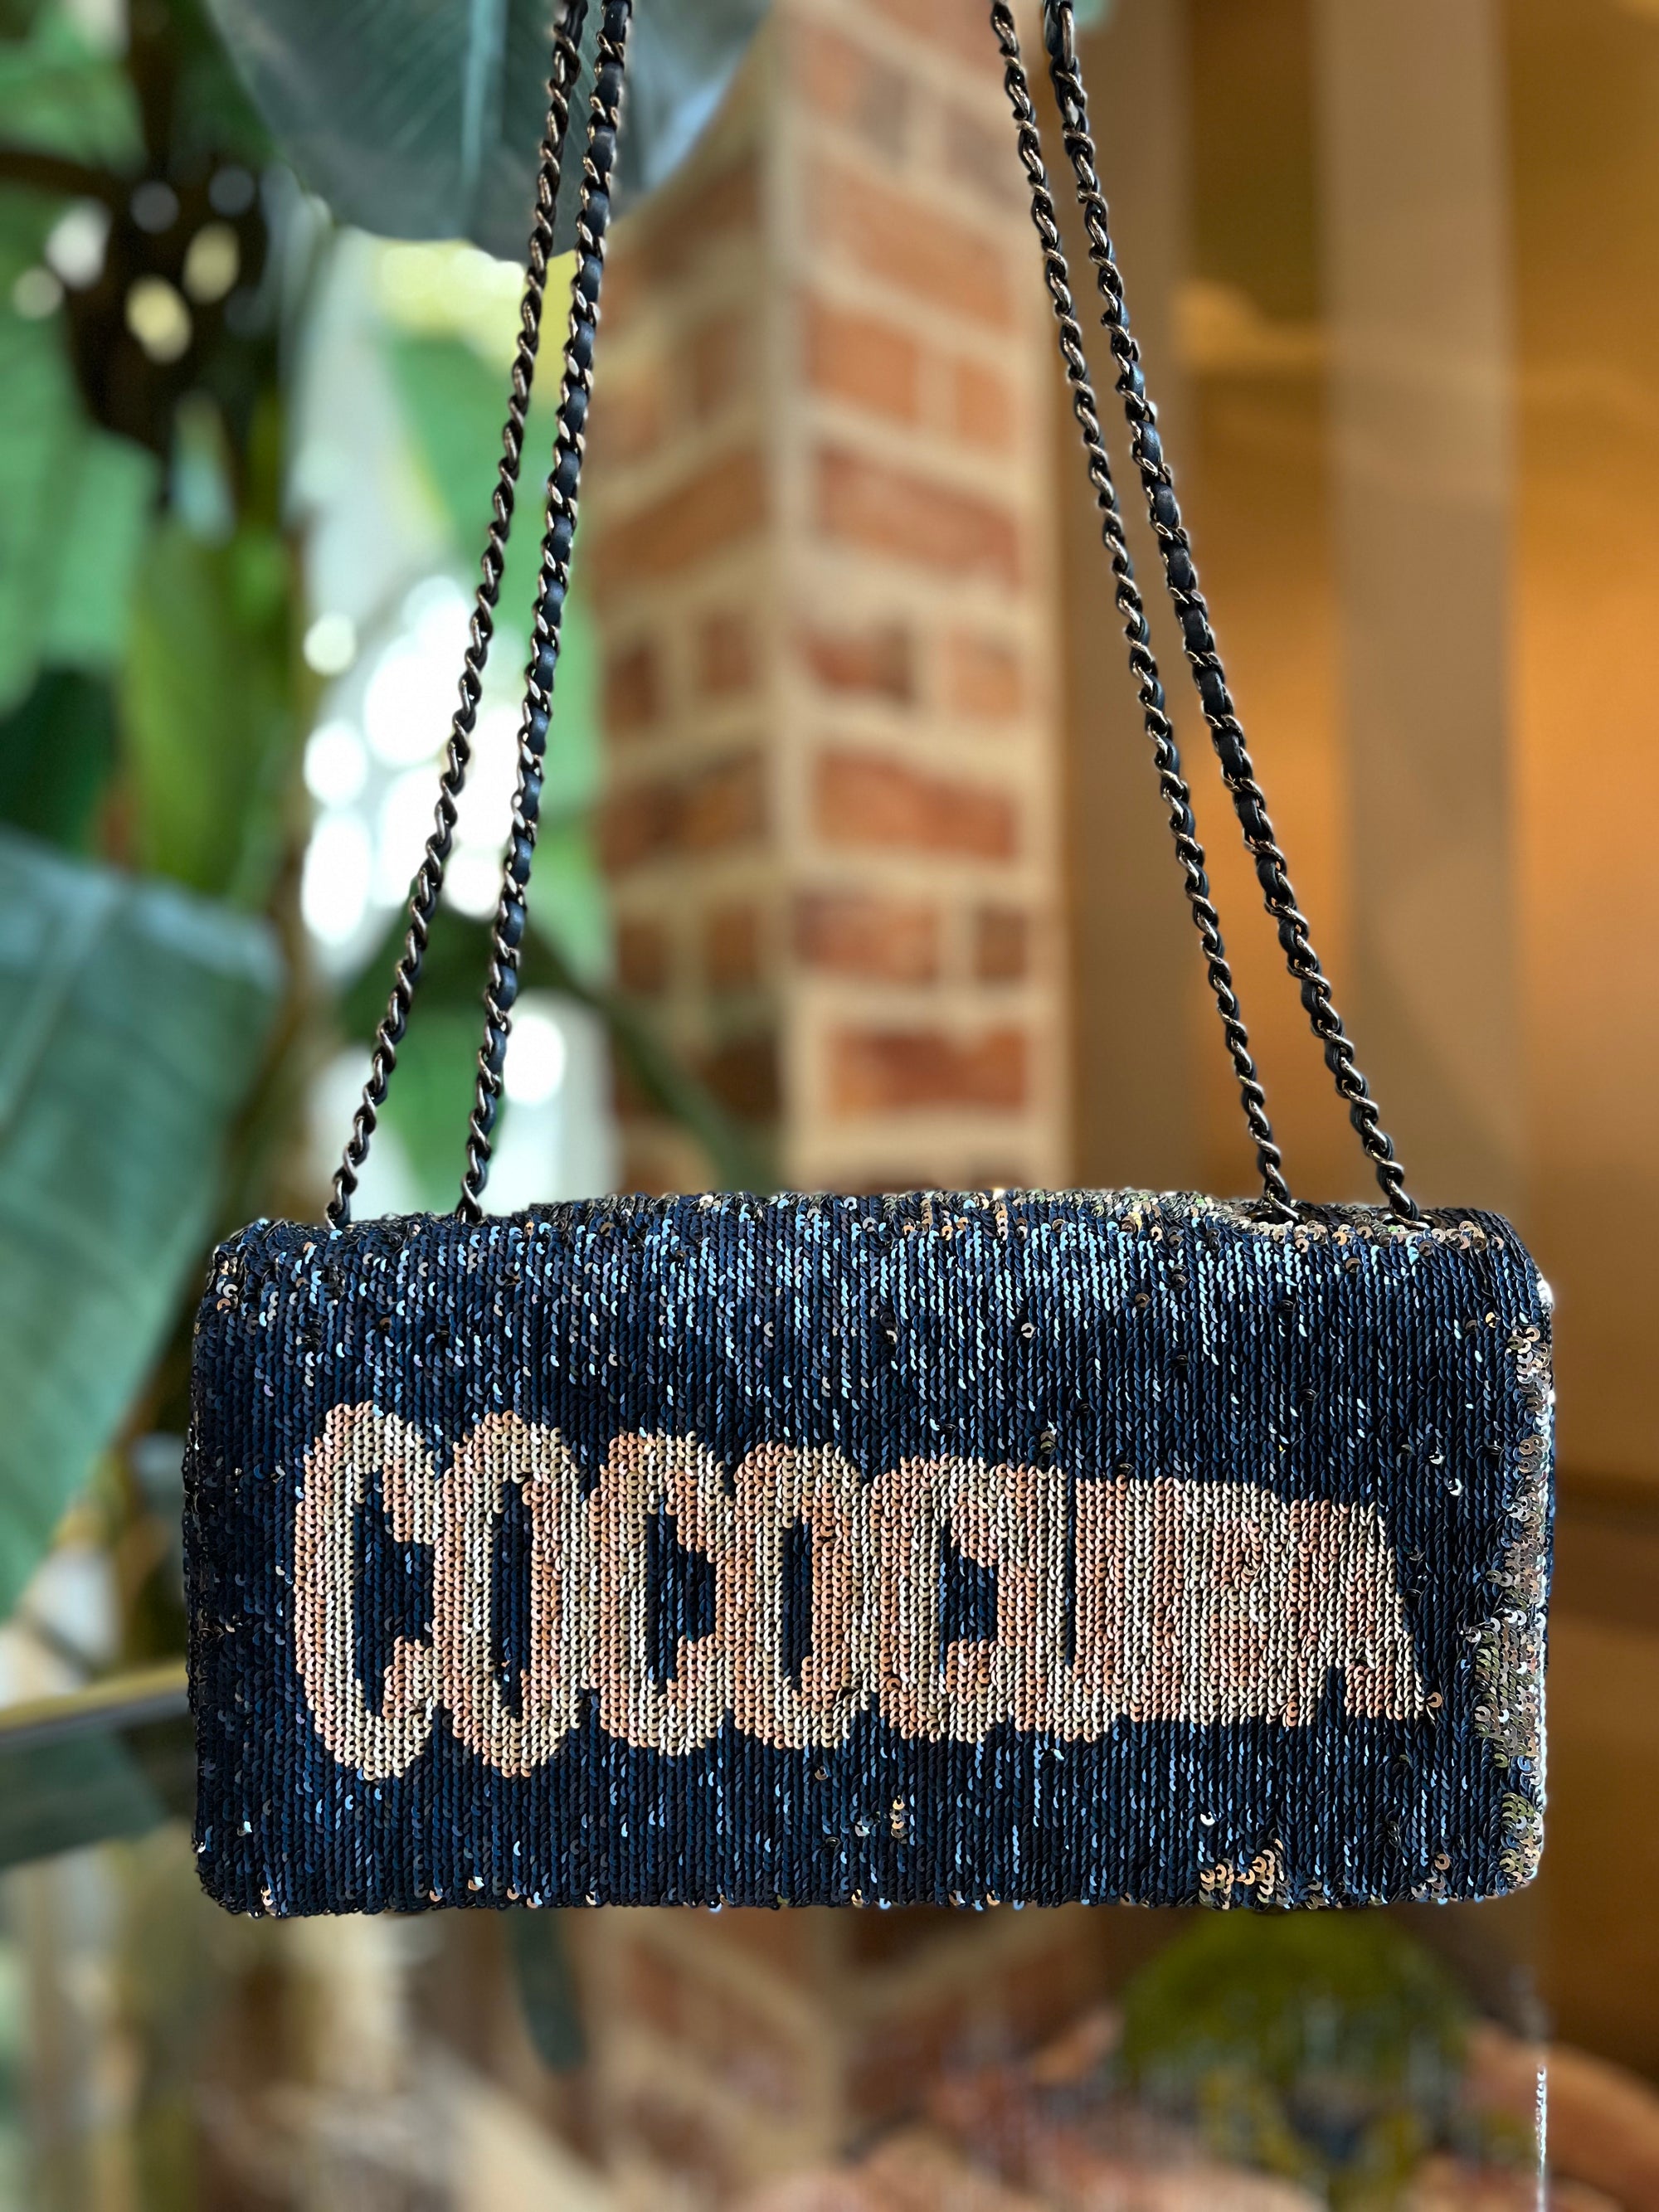 CHANEL Blue and SIlver Coco Cuba Sequin Flap